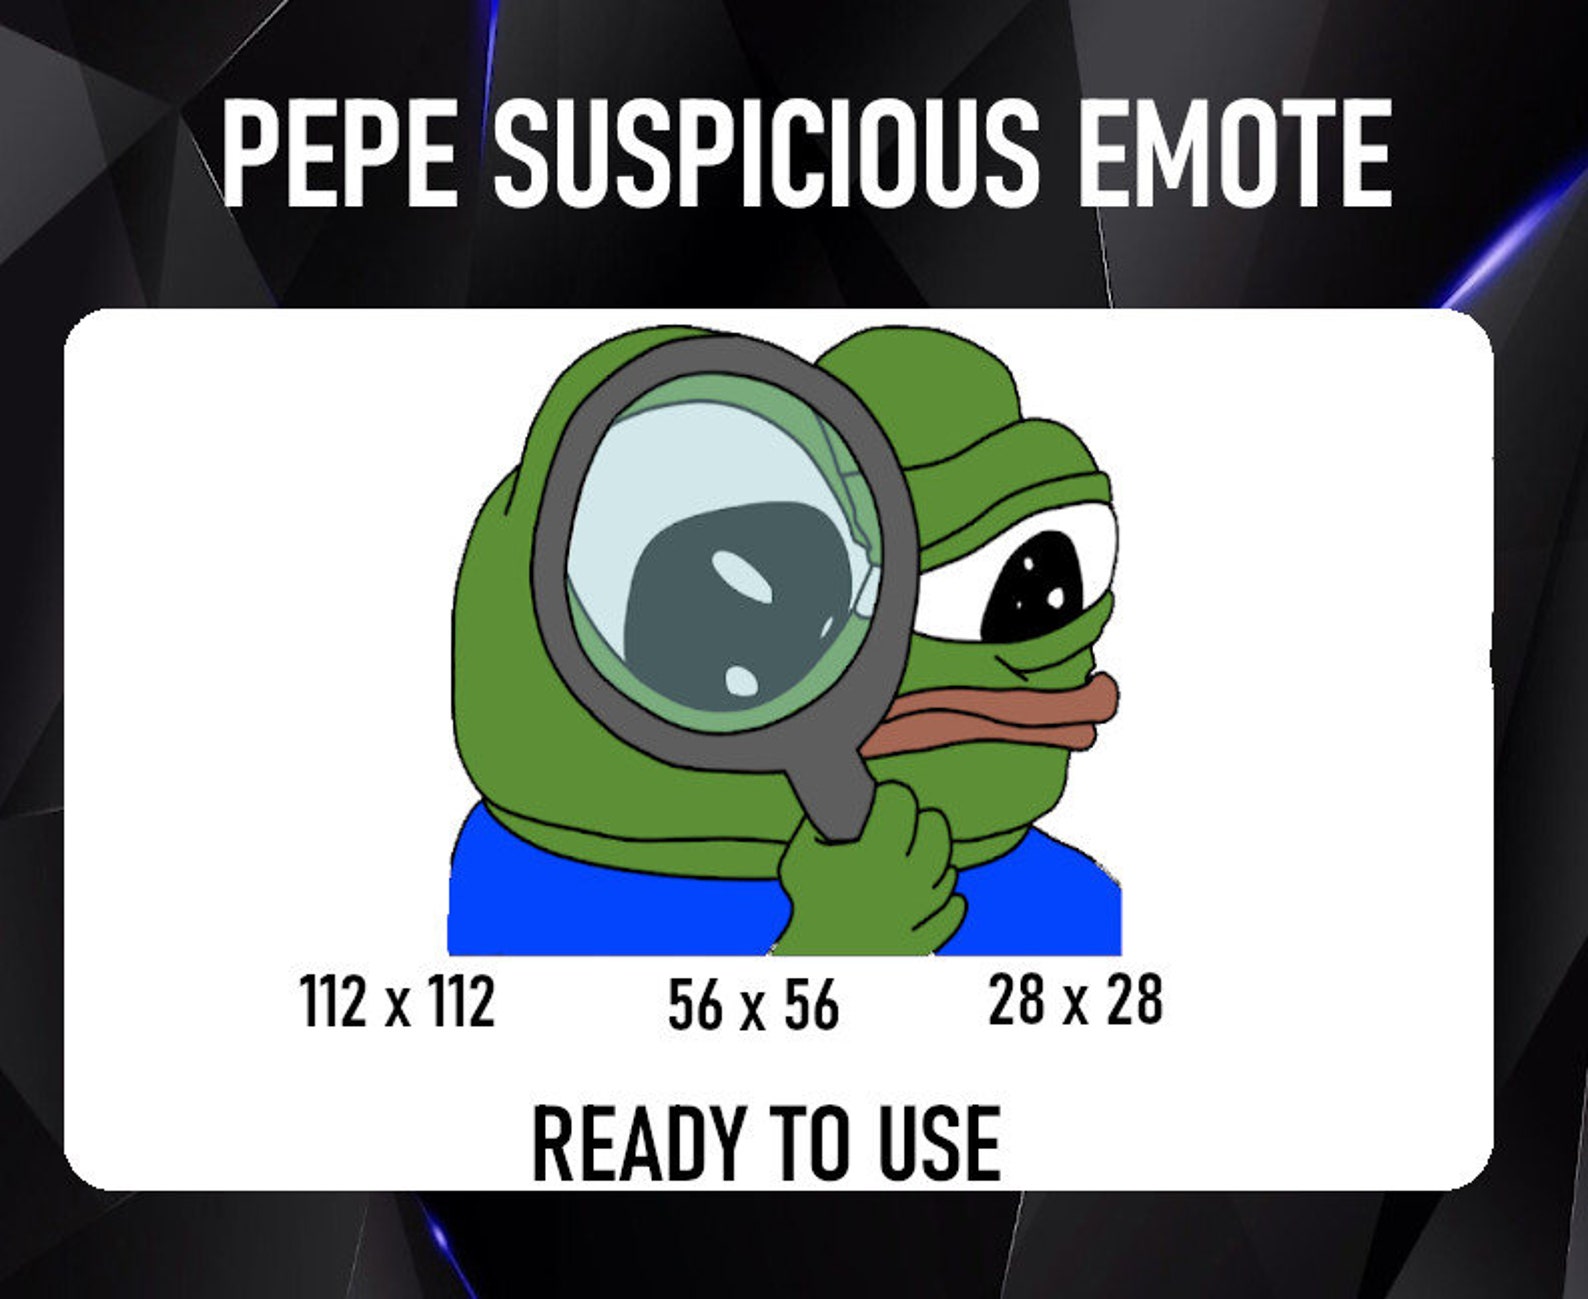 Pepe Suspicious Emote for Twitch Discord or YouTube | Etsy